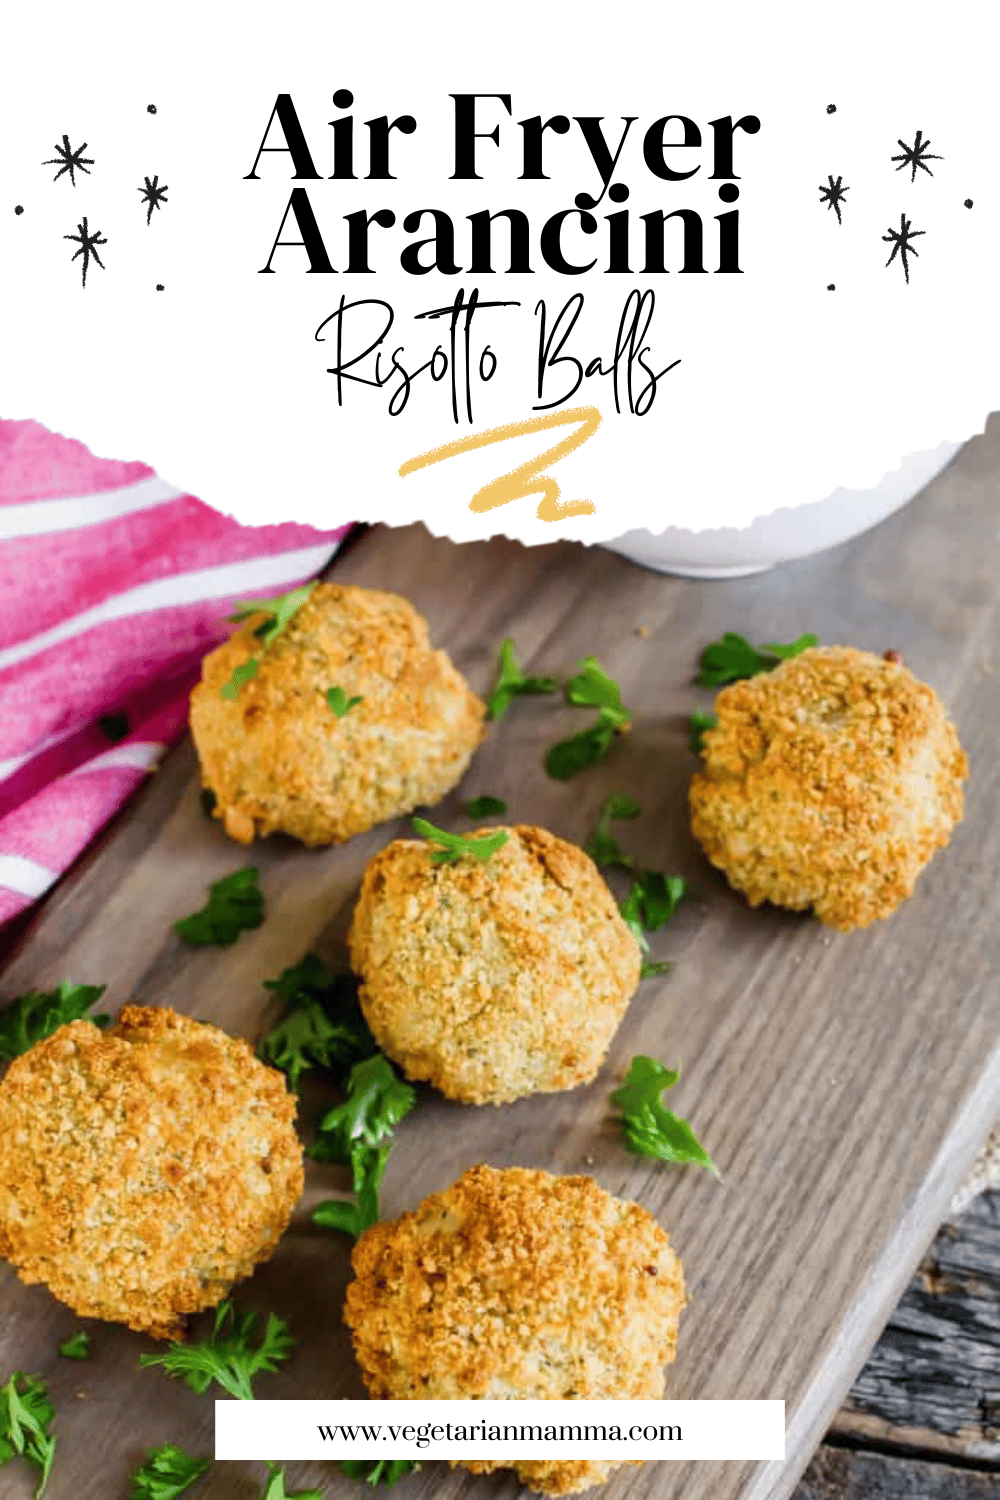 Game changing air fryer risotto balls to try right now! Use your leftover risotto to make these delicious arancini balls.